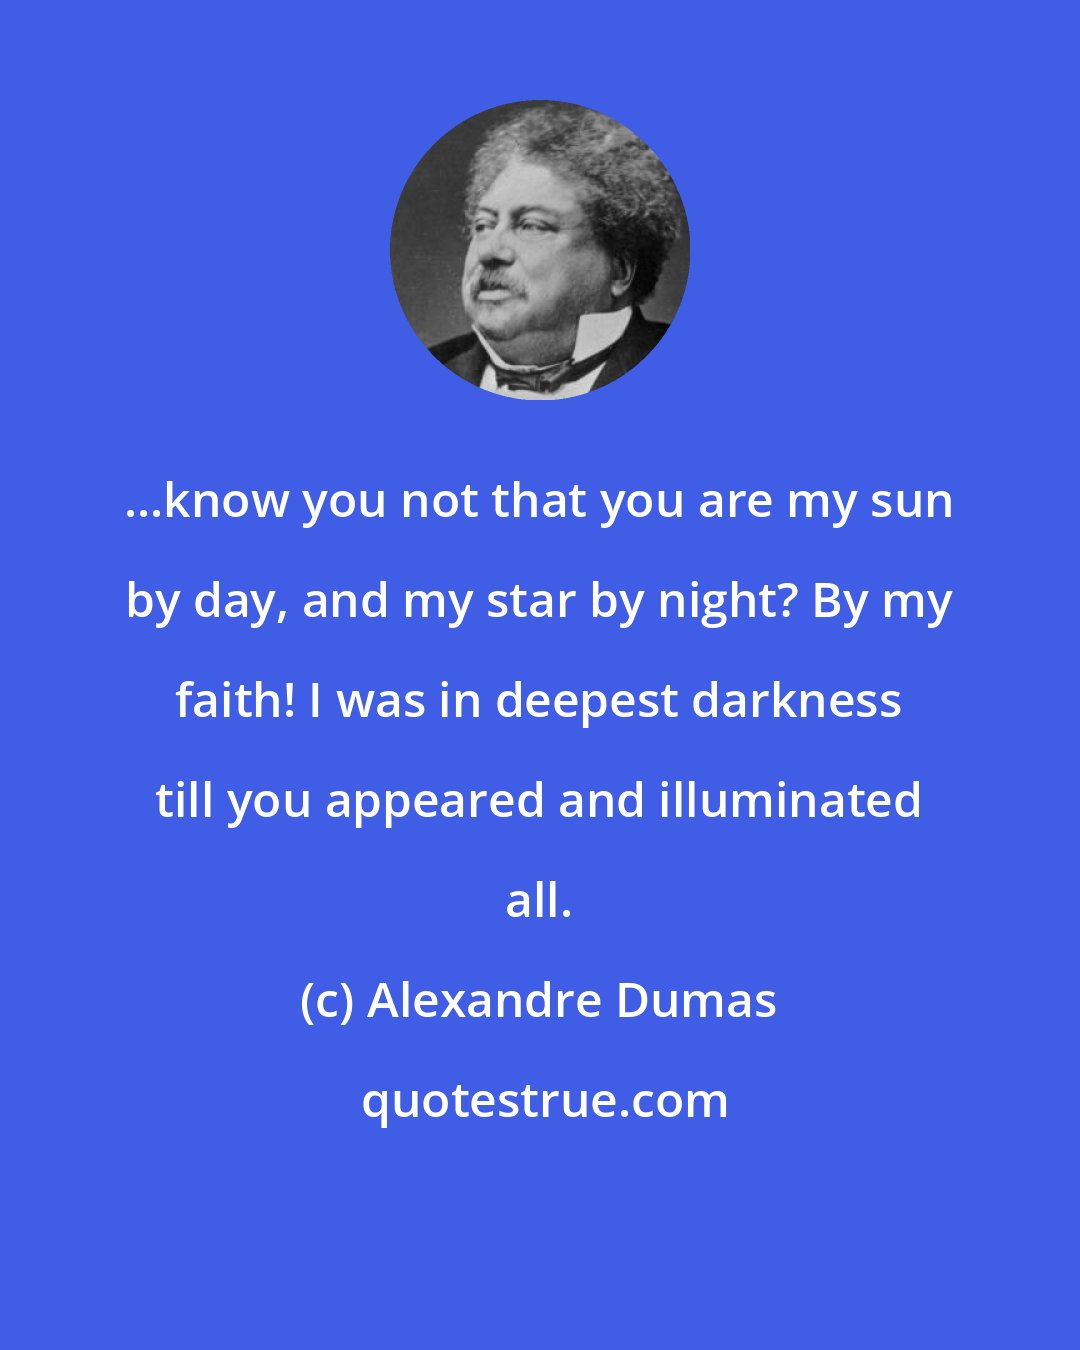 Alexandre Dumas: ...know you not that you are my sun by day, and my star by night? By my faith! I was in deepest darkness till you appeared and illuminated all.